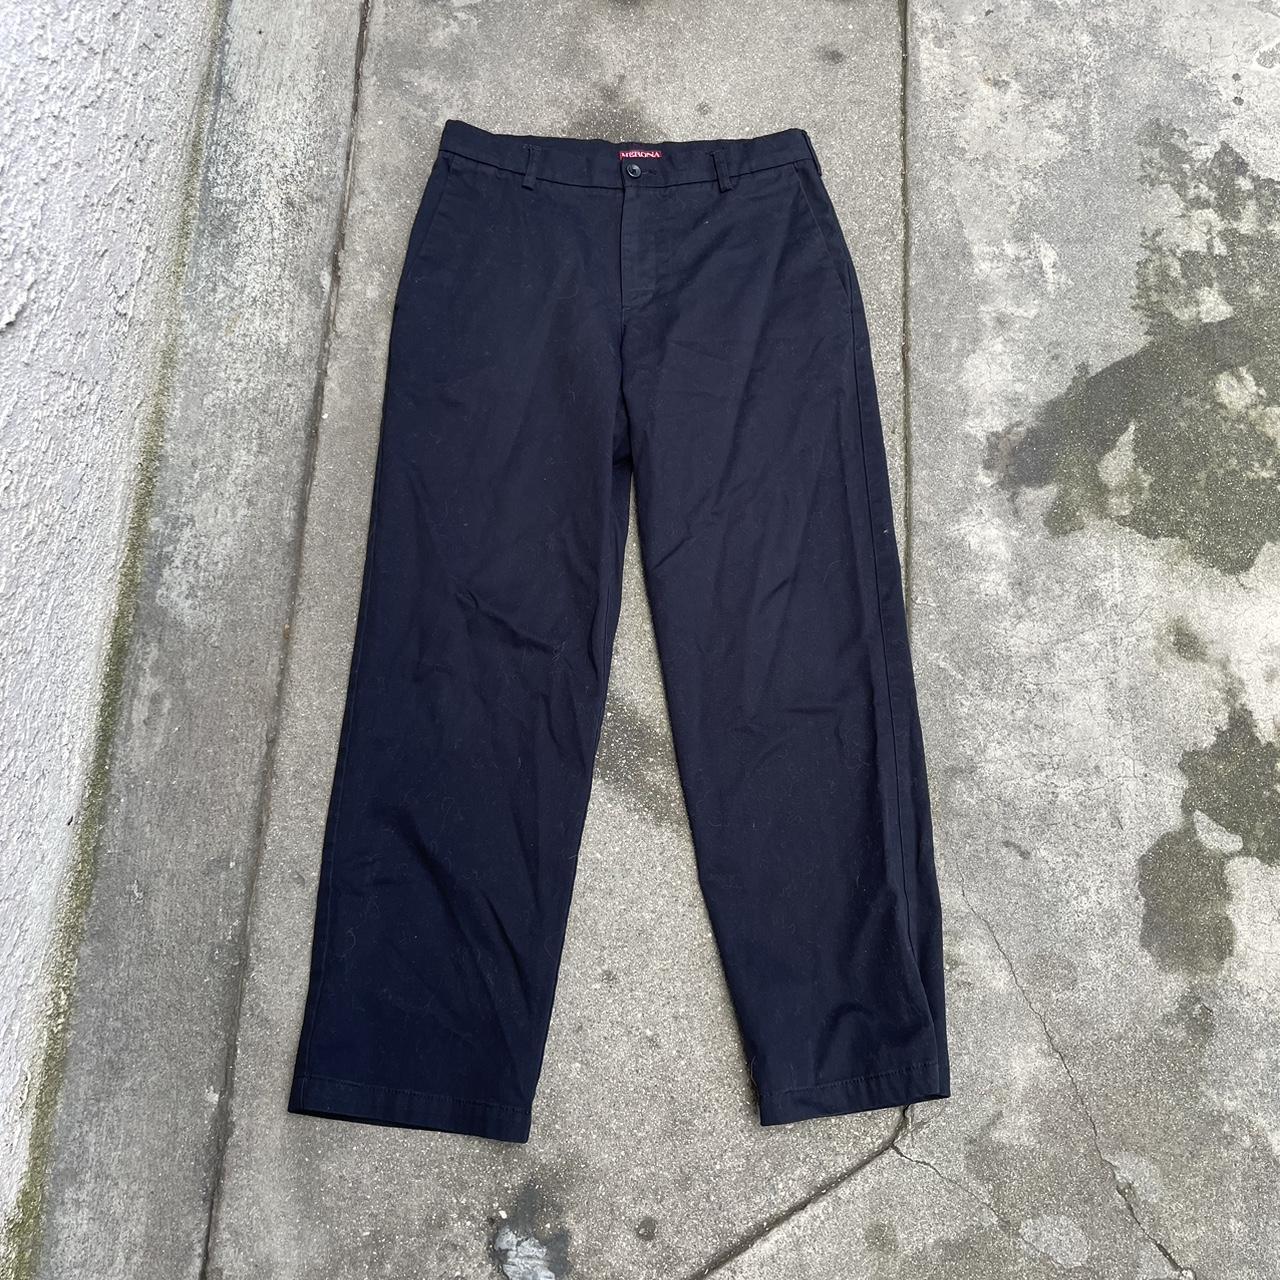 Merona Pants 32x30 All offers accepted - Depop